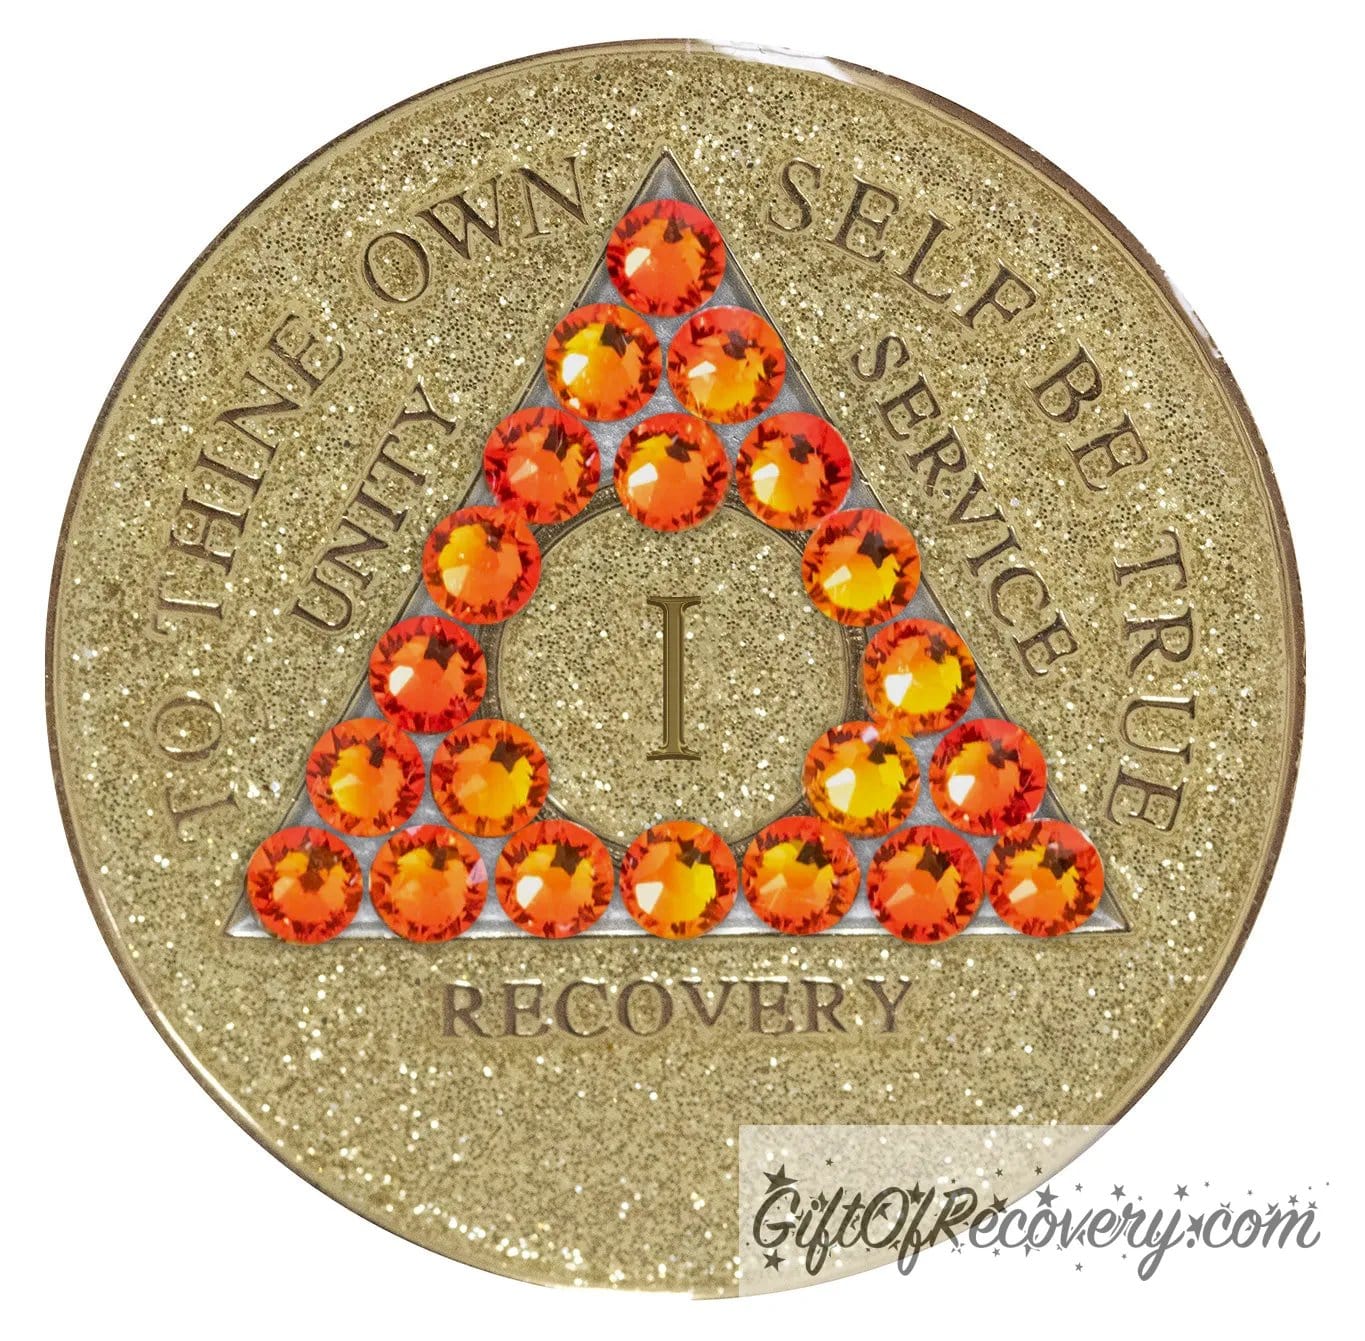 1 year Gold glitter AA medallion with twenty-one fire opal genuine crystals in the shape of a triangle, to thine own self be true, unity, service, recovery embossed in 14k gold-plated brass along with the rim of the medallion, sealed in a high-quality, chip and scratch-resistant resin dome giving it a beautiful glossy look that will last.